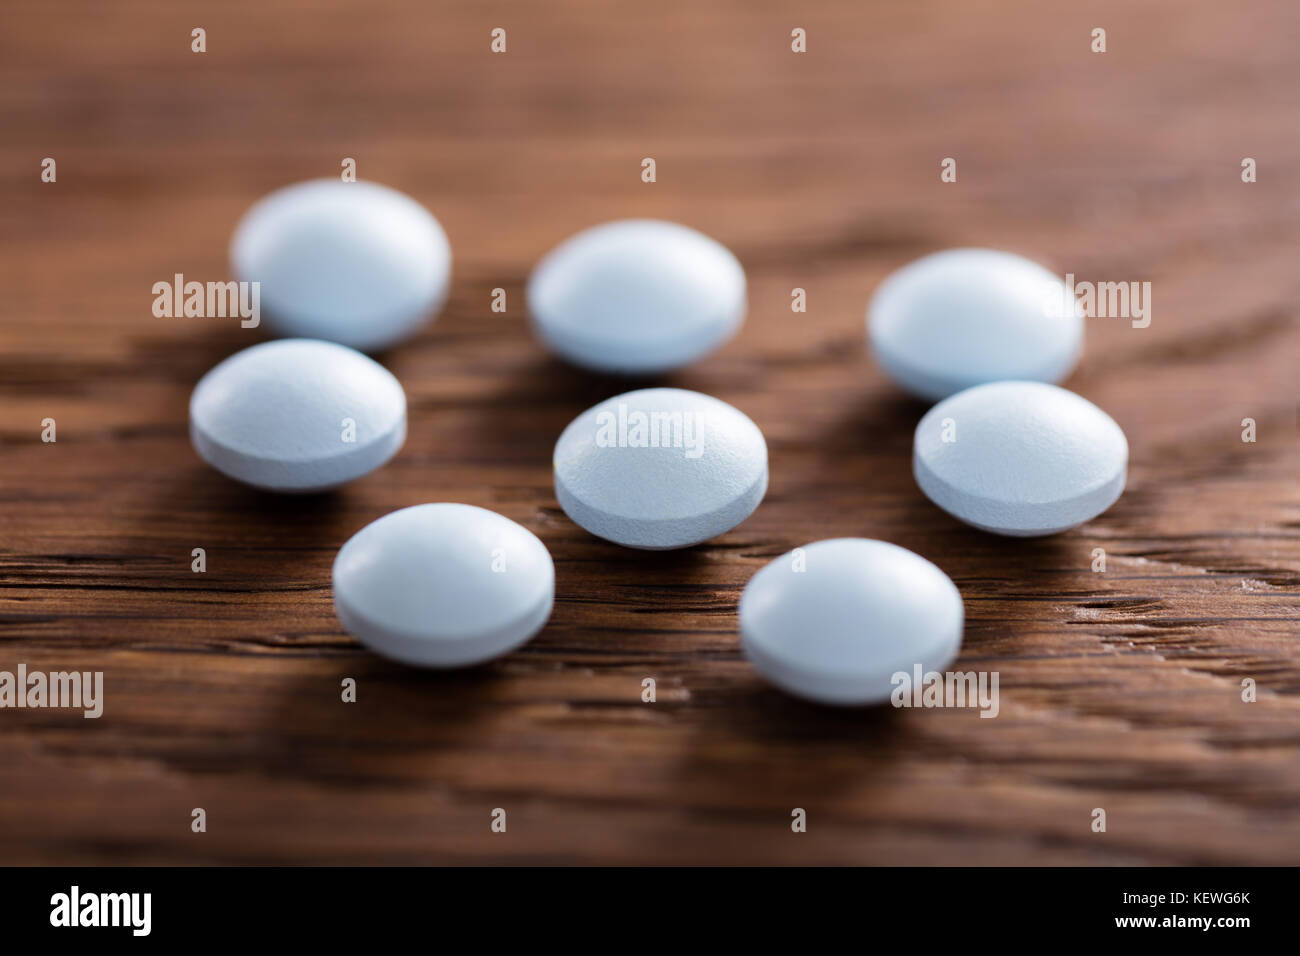 Close-up Of Ecstasy Pills On Wooden Desk Stock Photo